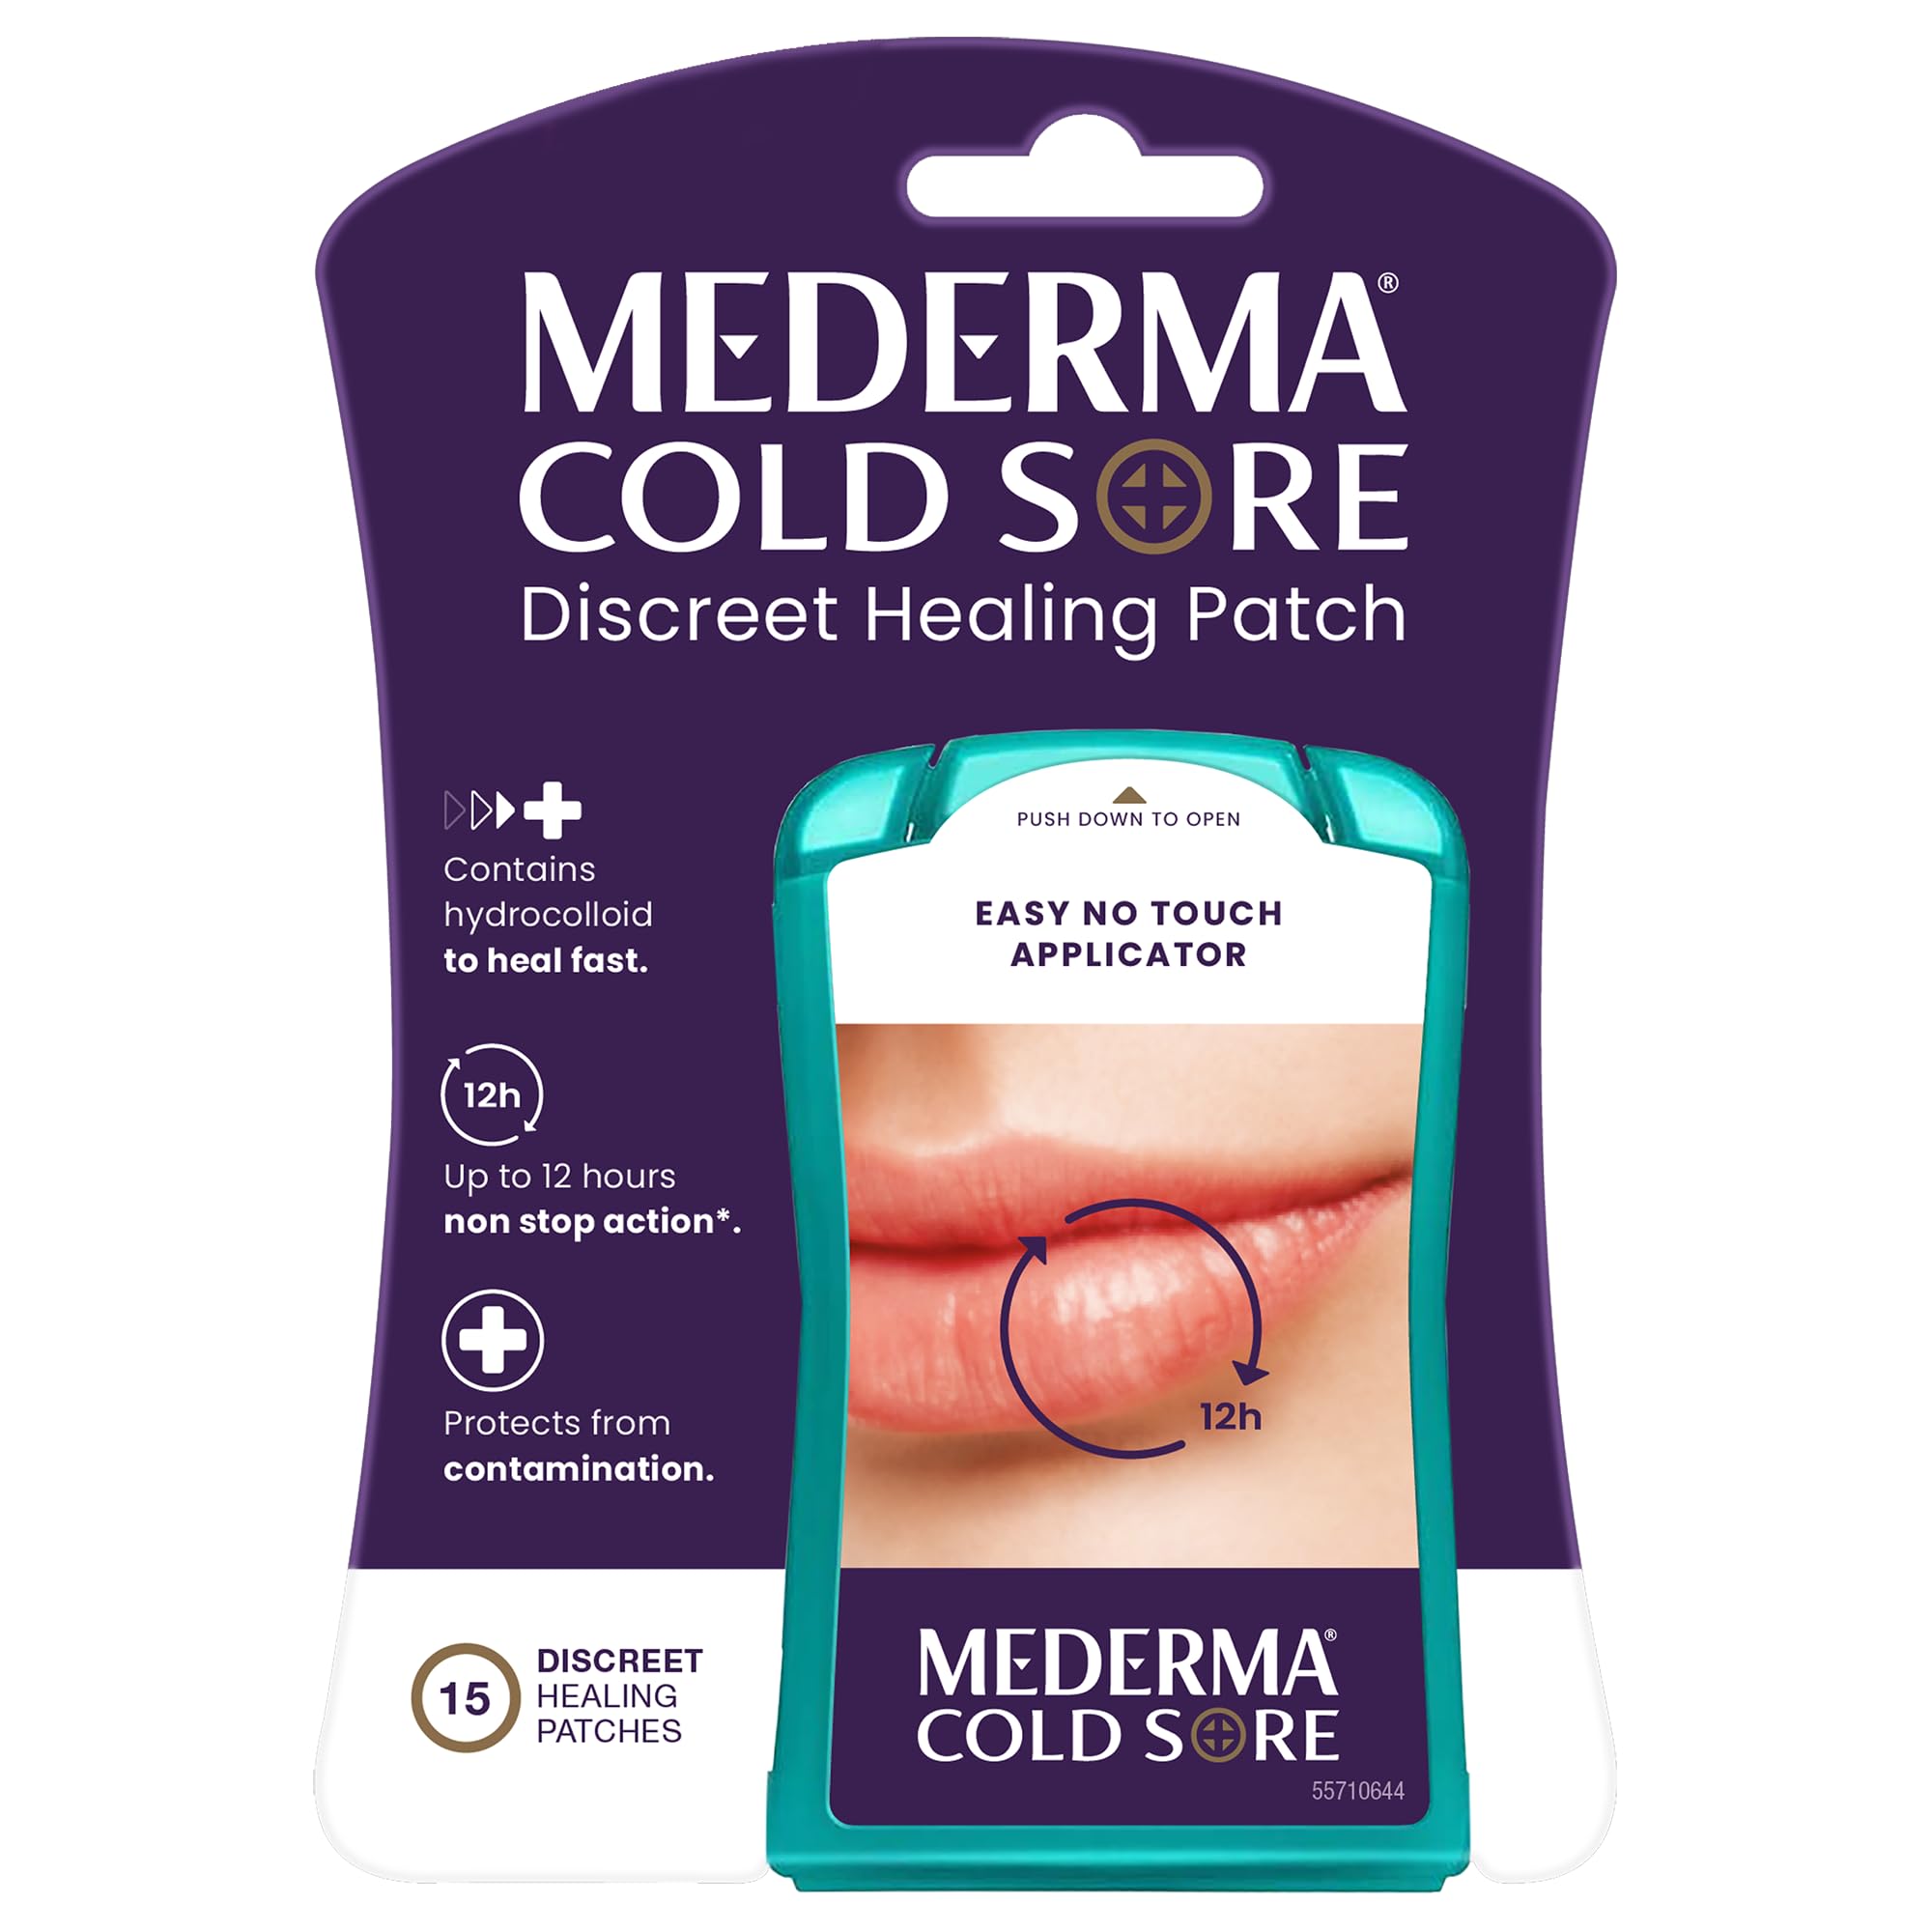 Mederma Fever Blister Discreet Healing Patch - A Patch That Protects and Conceals Cold Sores & Campho-Phenique Cold Sore and Fever Blister Treatment for Lips